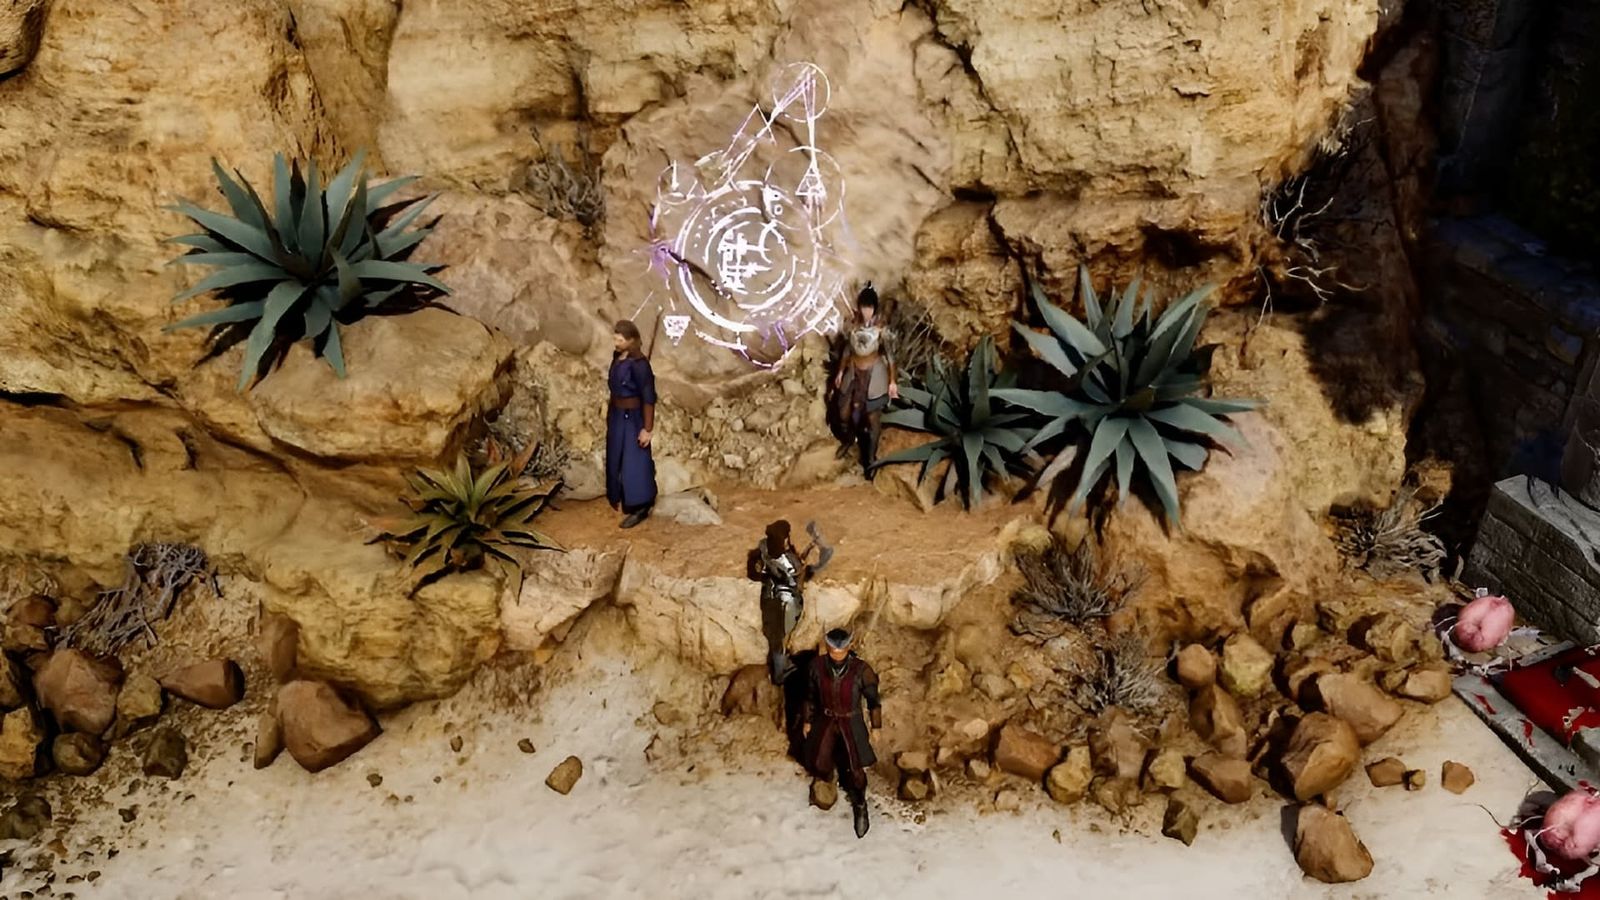 A party discovering an Ancient Rune Circle fast travel point in Baldur's Gate 3.